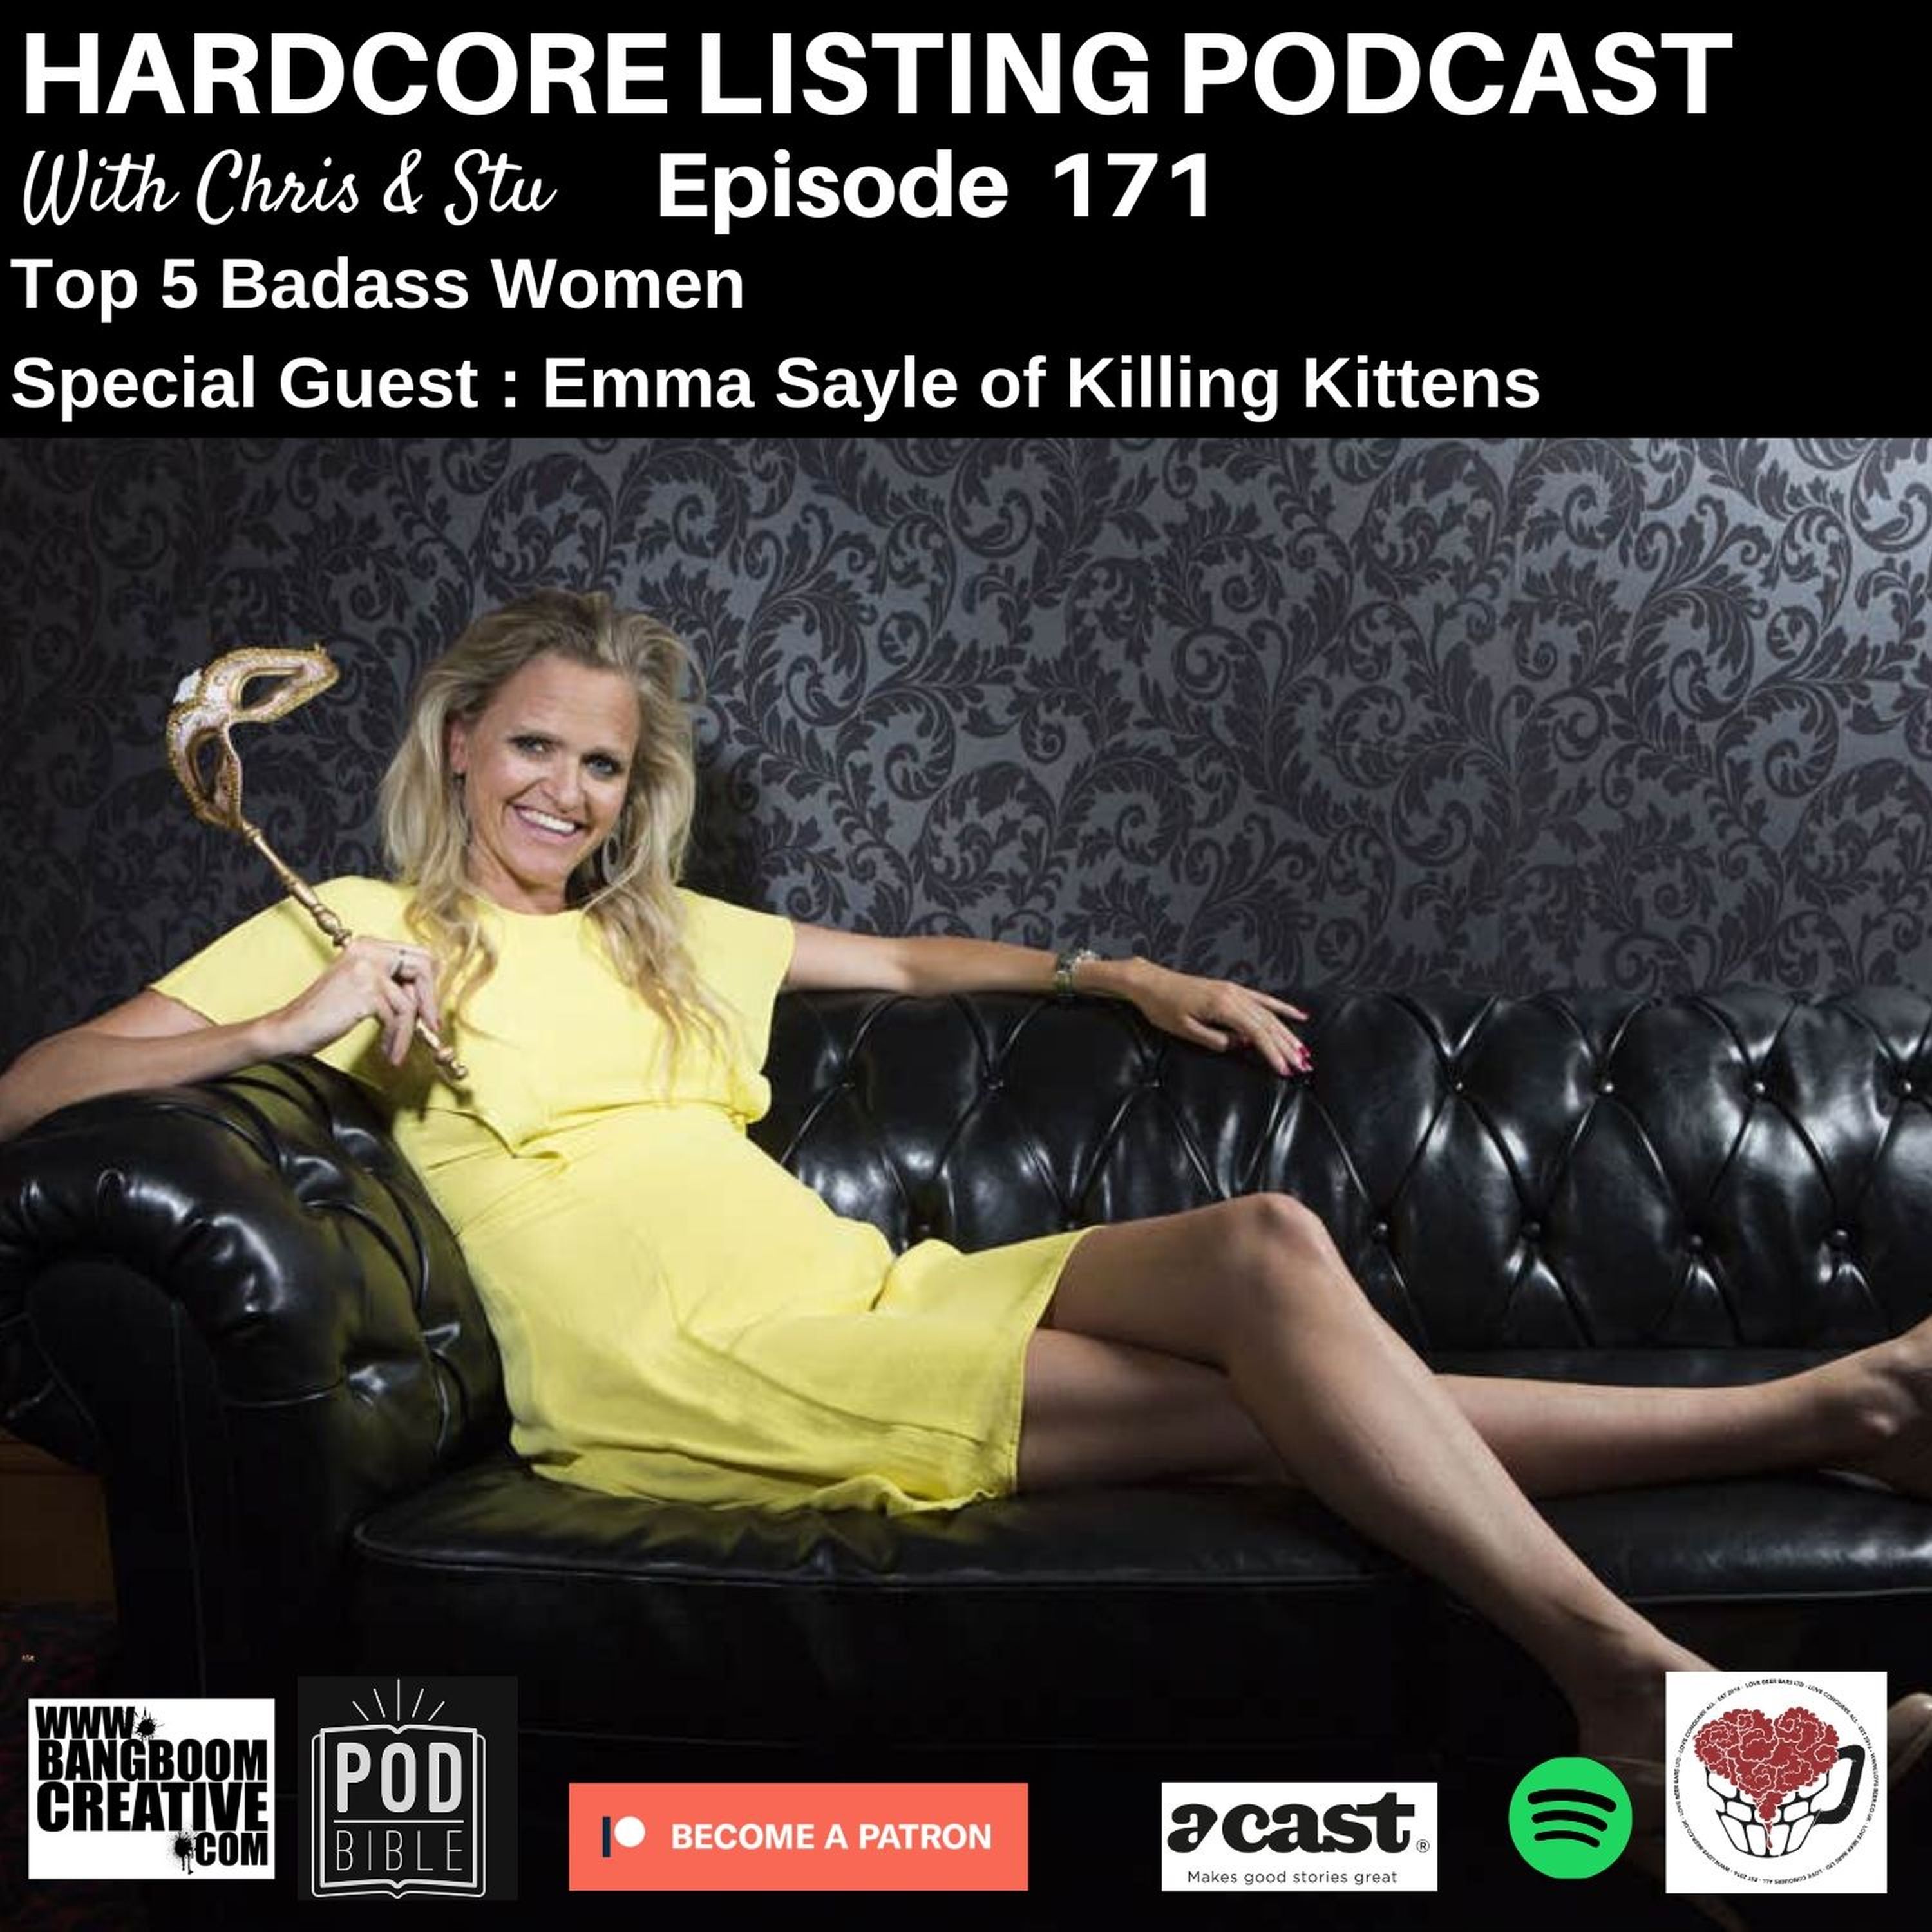 cover art for Top 5 Badass women with Emma Sayle of Killing Kittens